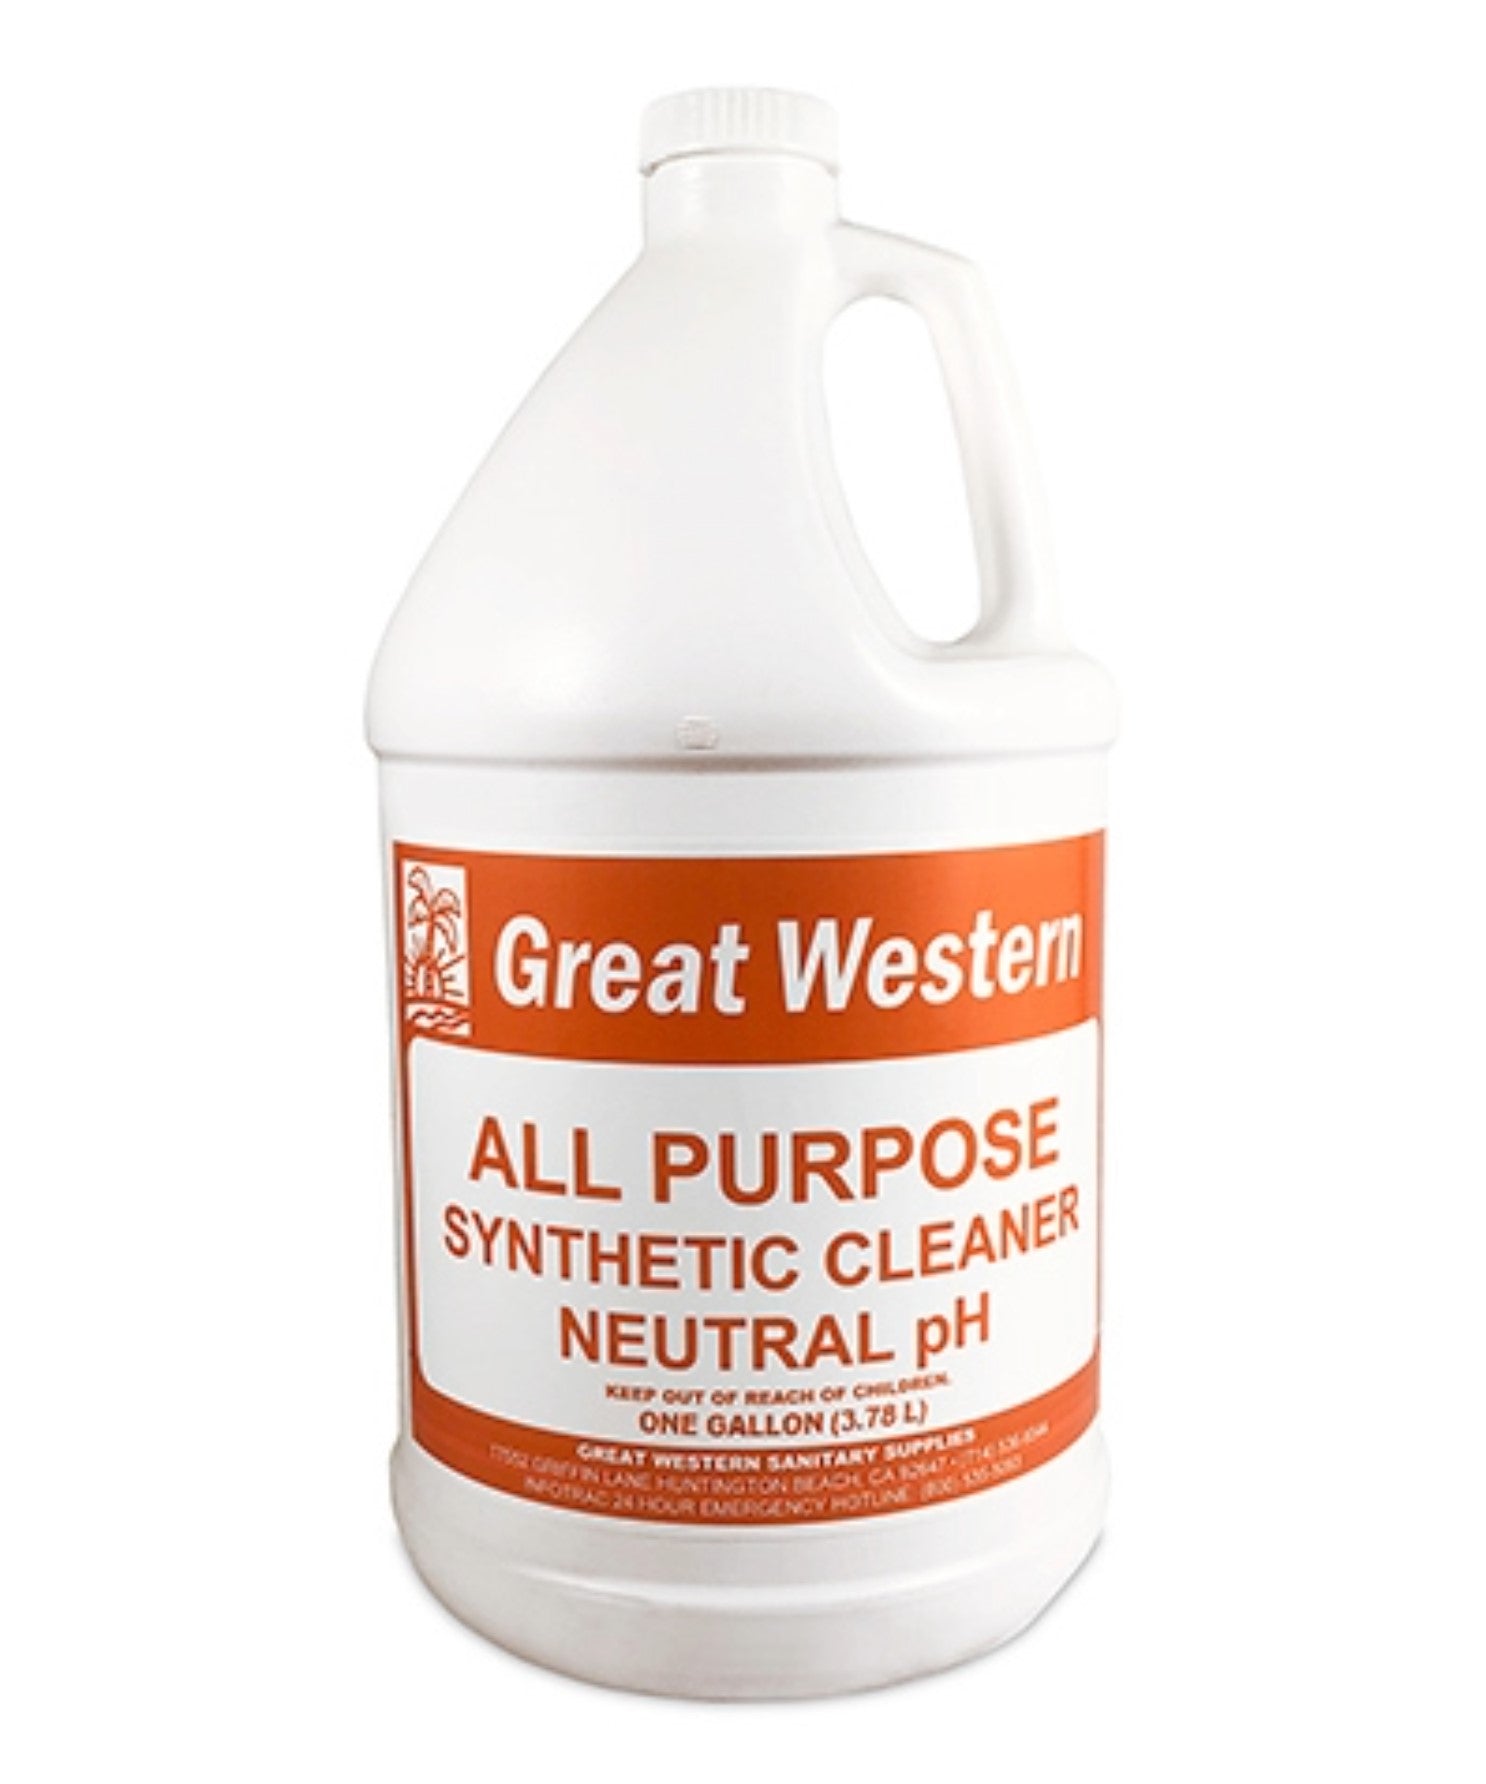 All Purpose Synthetic Cleaner Boat Soap Gallon